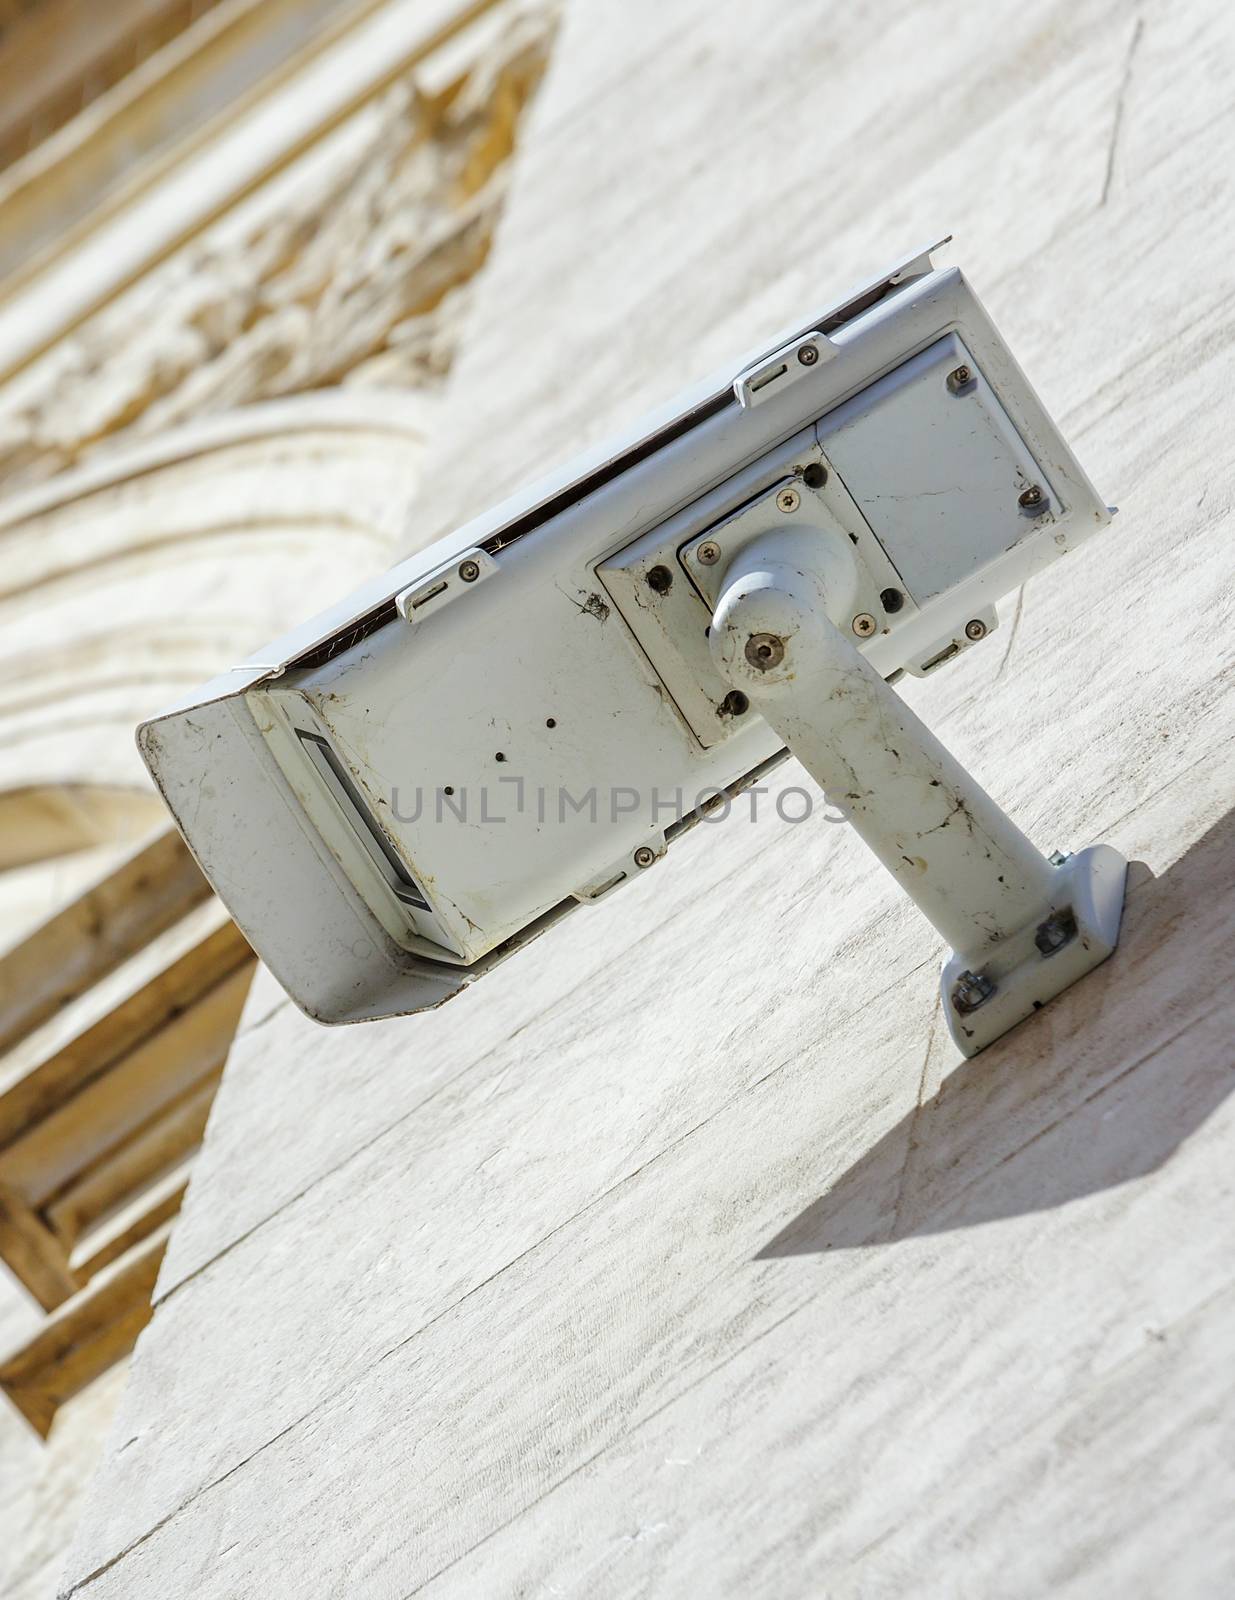 security CCTV camera or surveillance system fixed on old construction wall